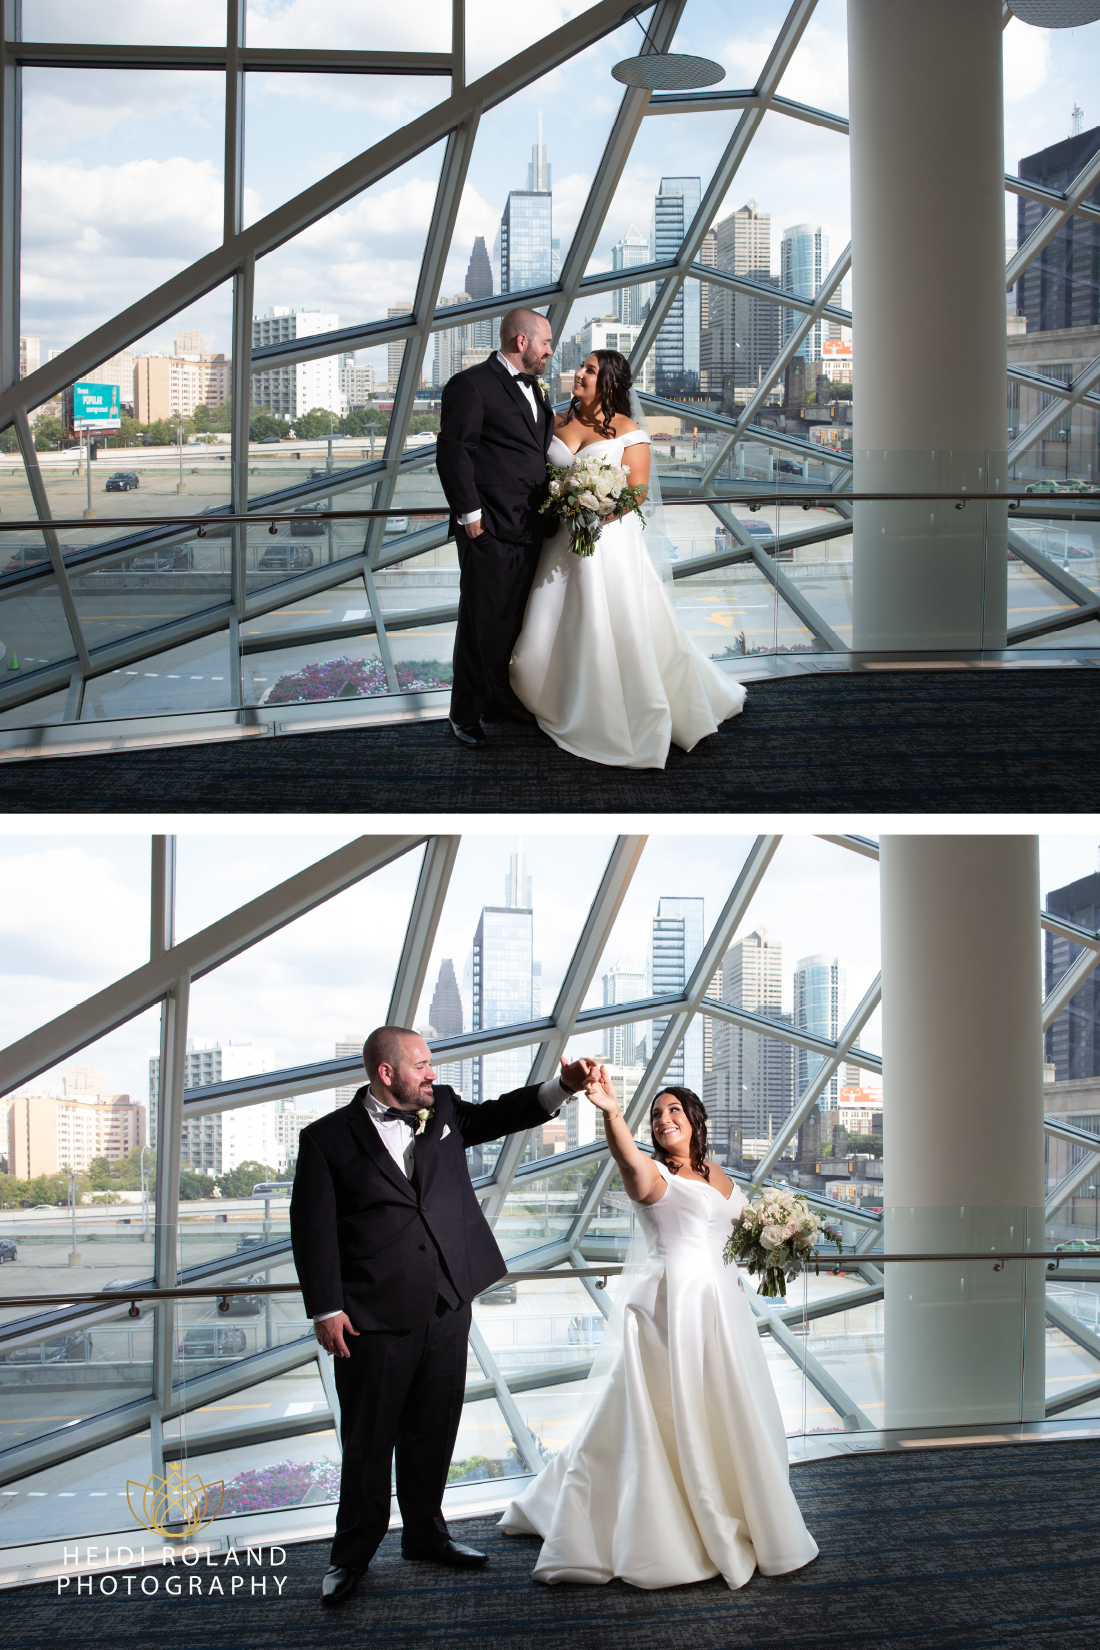 Bride and groom in the Atrium of the Cira Centre in philadelphia with the skyline in the background